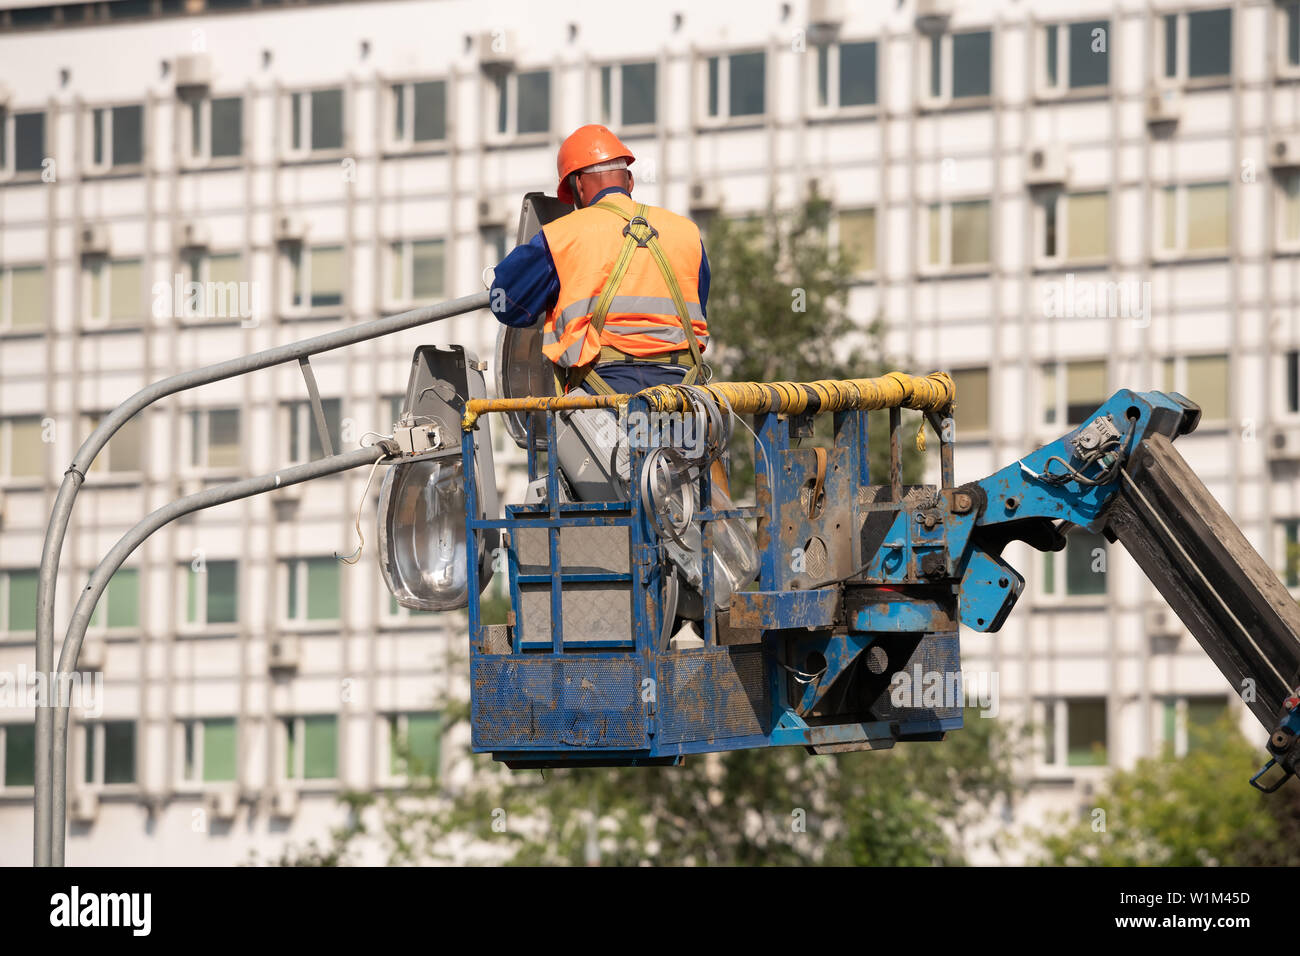 description: Worker in lift bucket during installation of metal pole with street lamp, street light pole with double head. Stock Photo